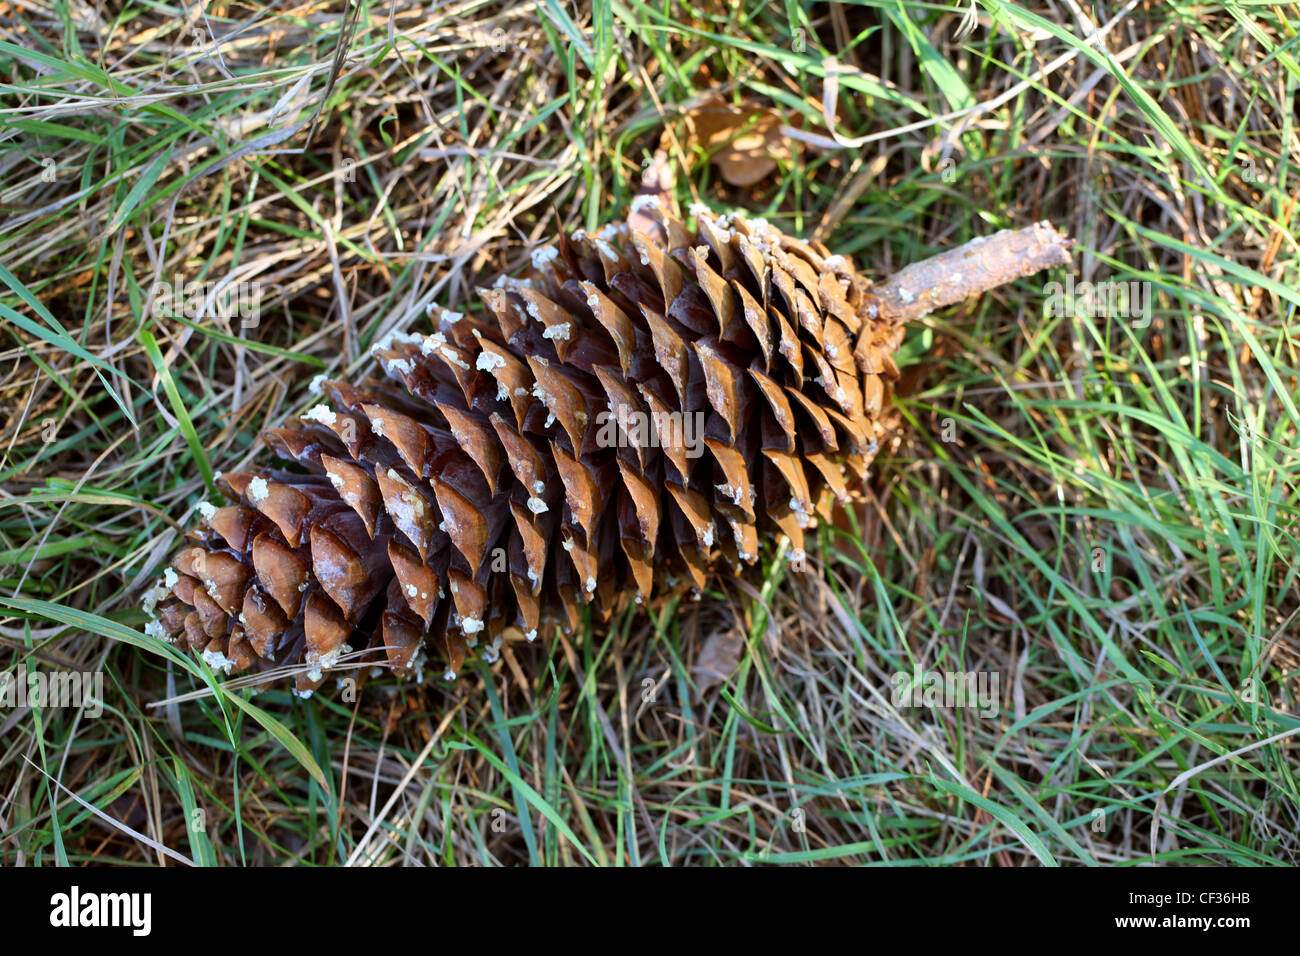 Large Seed Cone of the Macedonian Pine, Pinus peuce, Pinaceae. South East Europe. The Cone is Approximately 10 inches long. Stock Photo